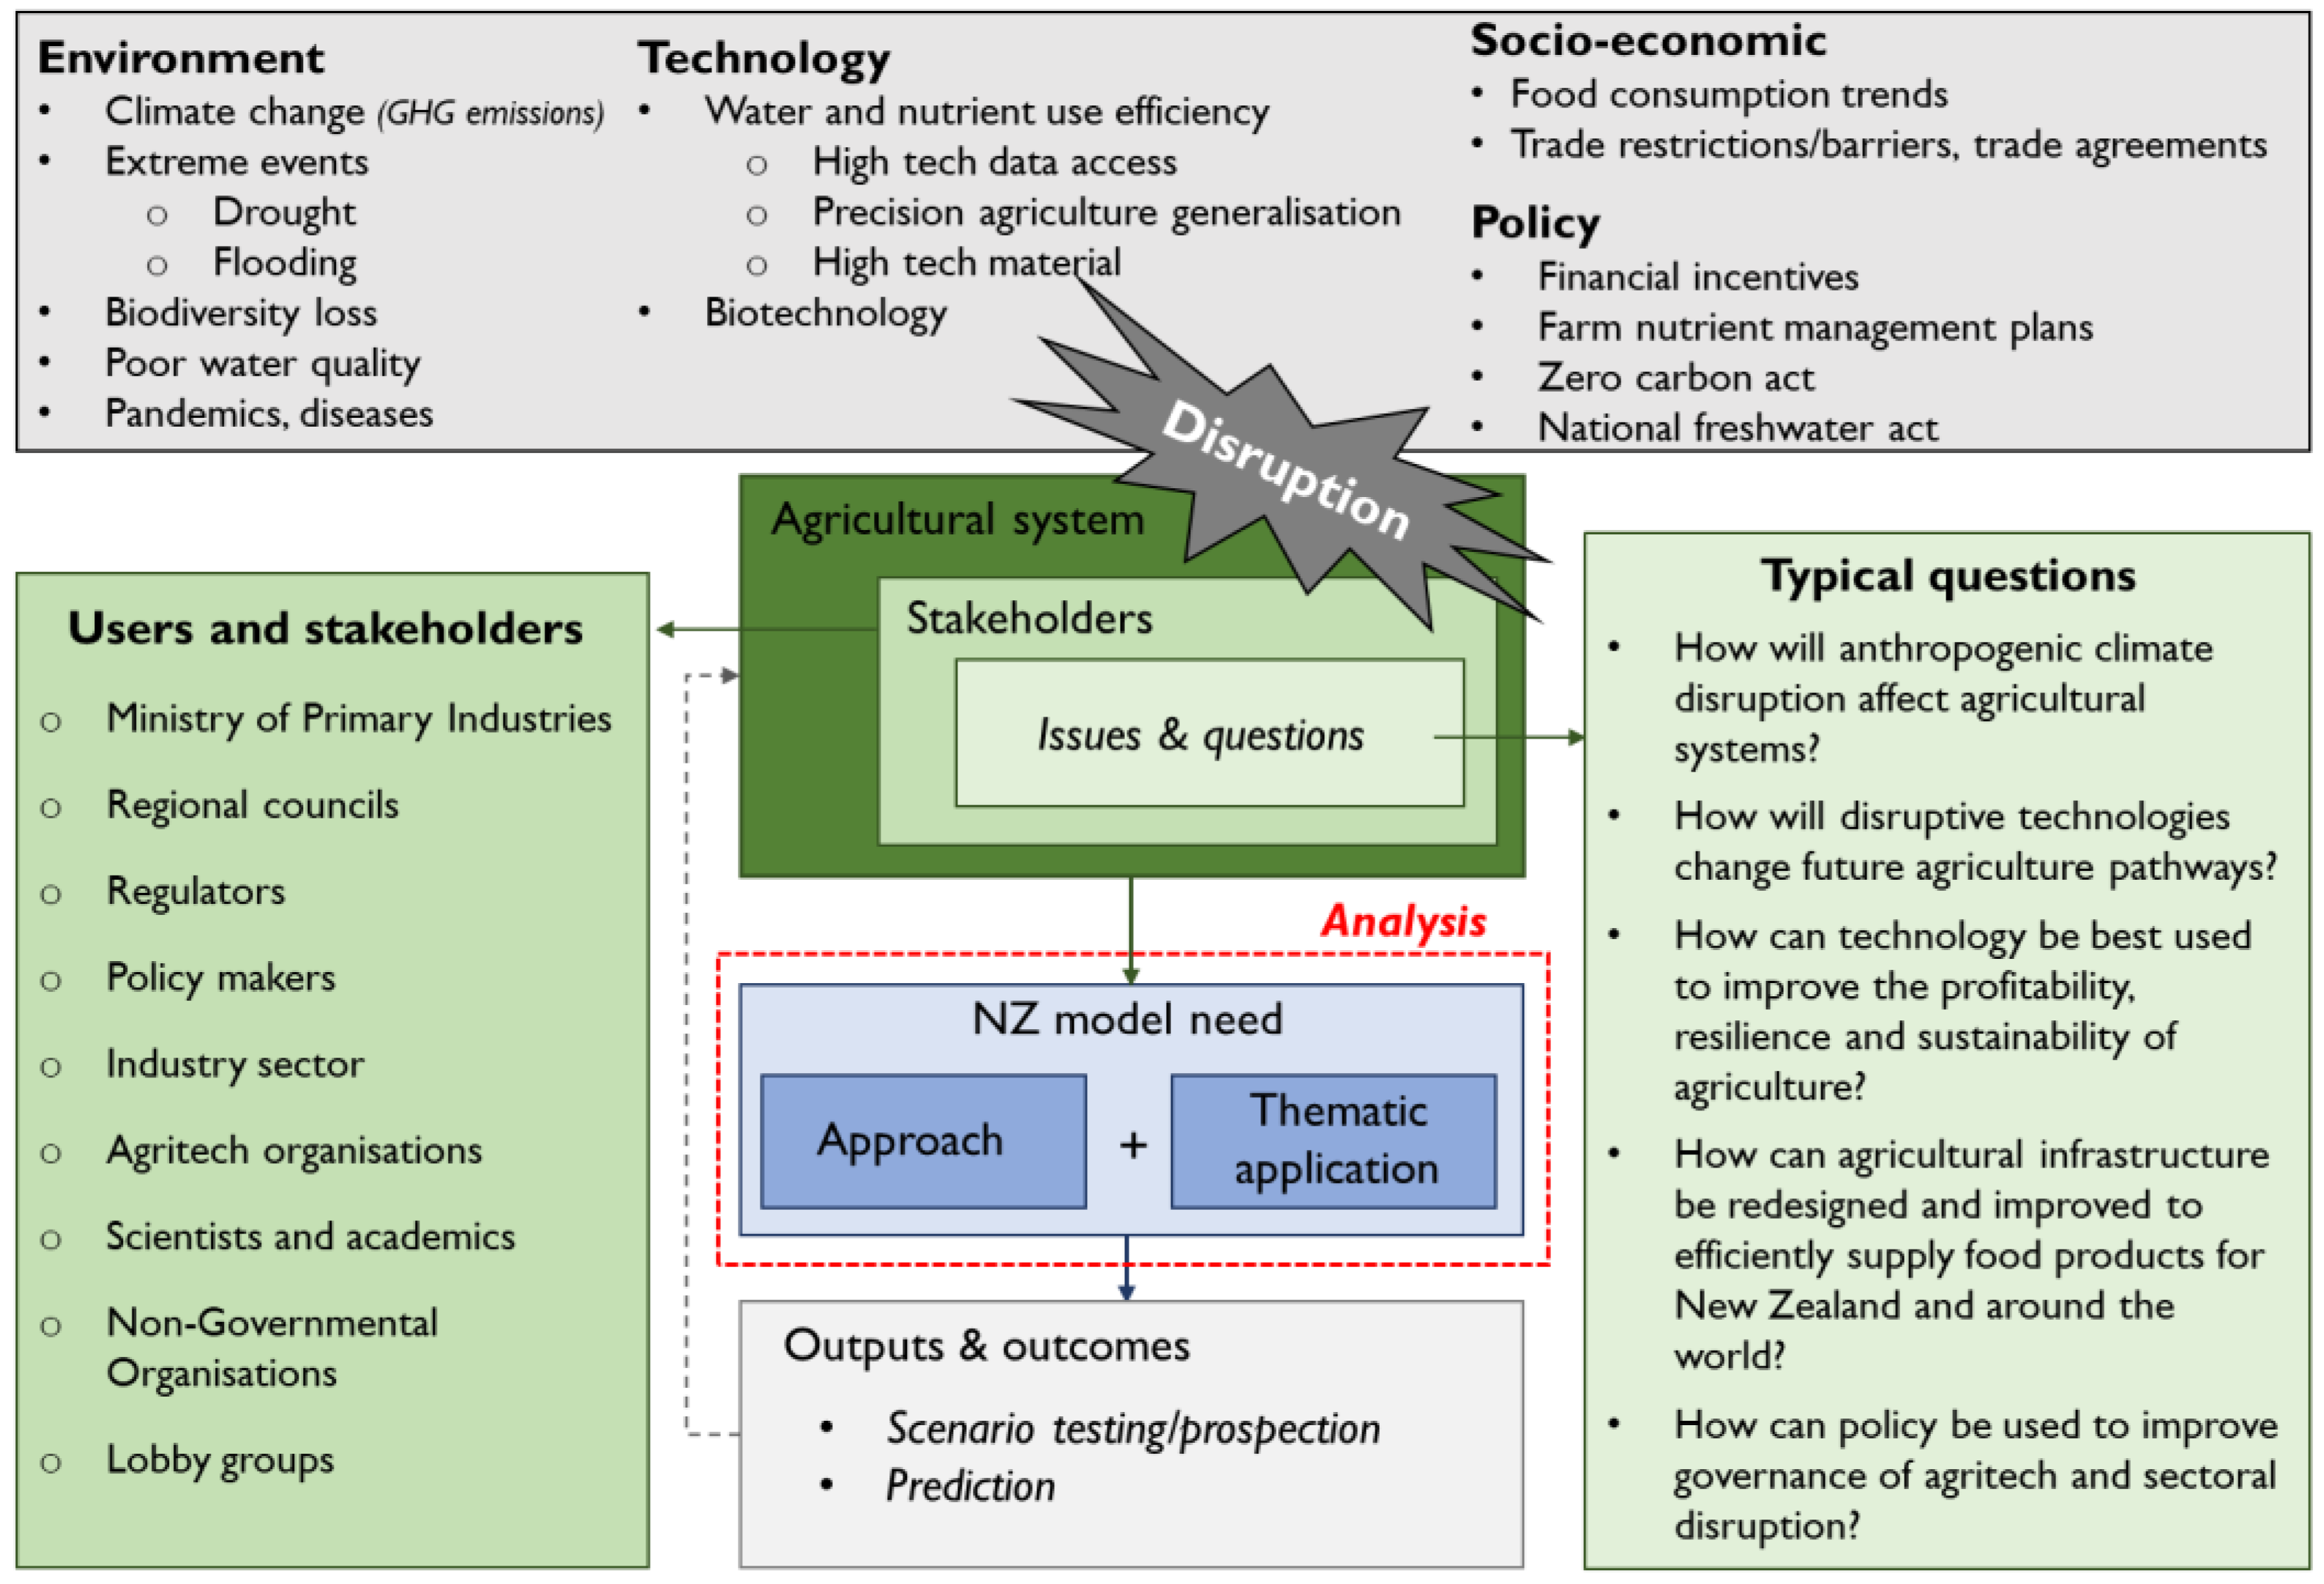 Applied Sciences | Free Full-Text | An Analysis of Agricultural Systems  Modelling Approaches and Examples to Support Future Policy Development  under Disruptive Changes in New Zealand